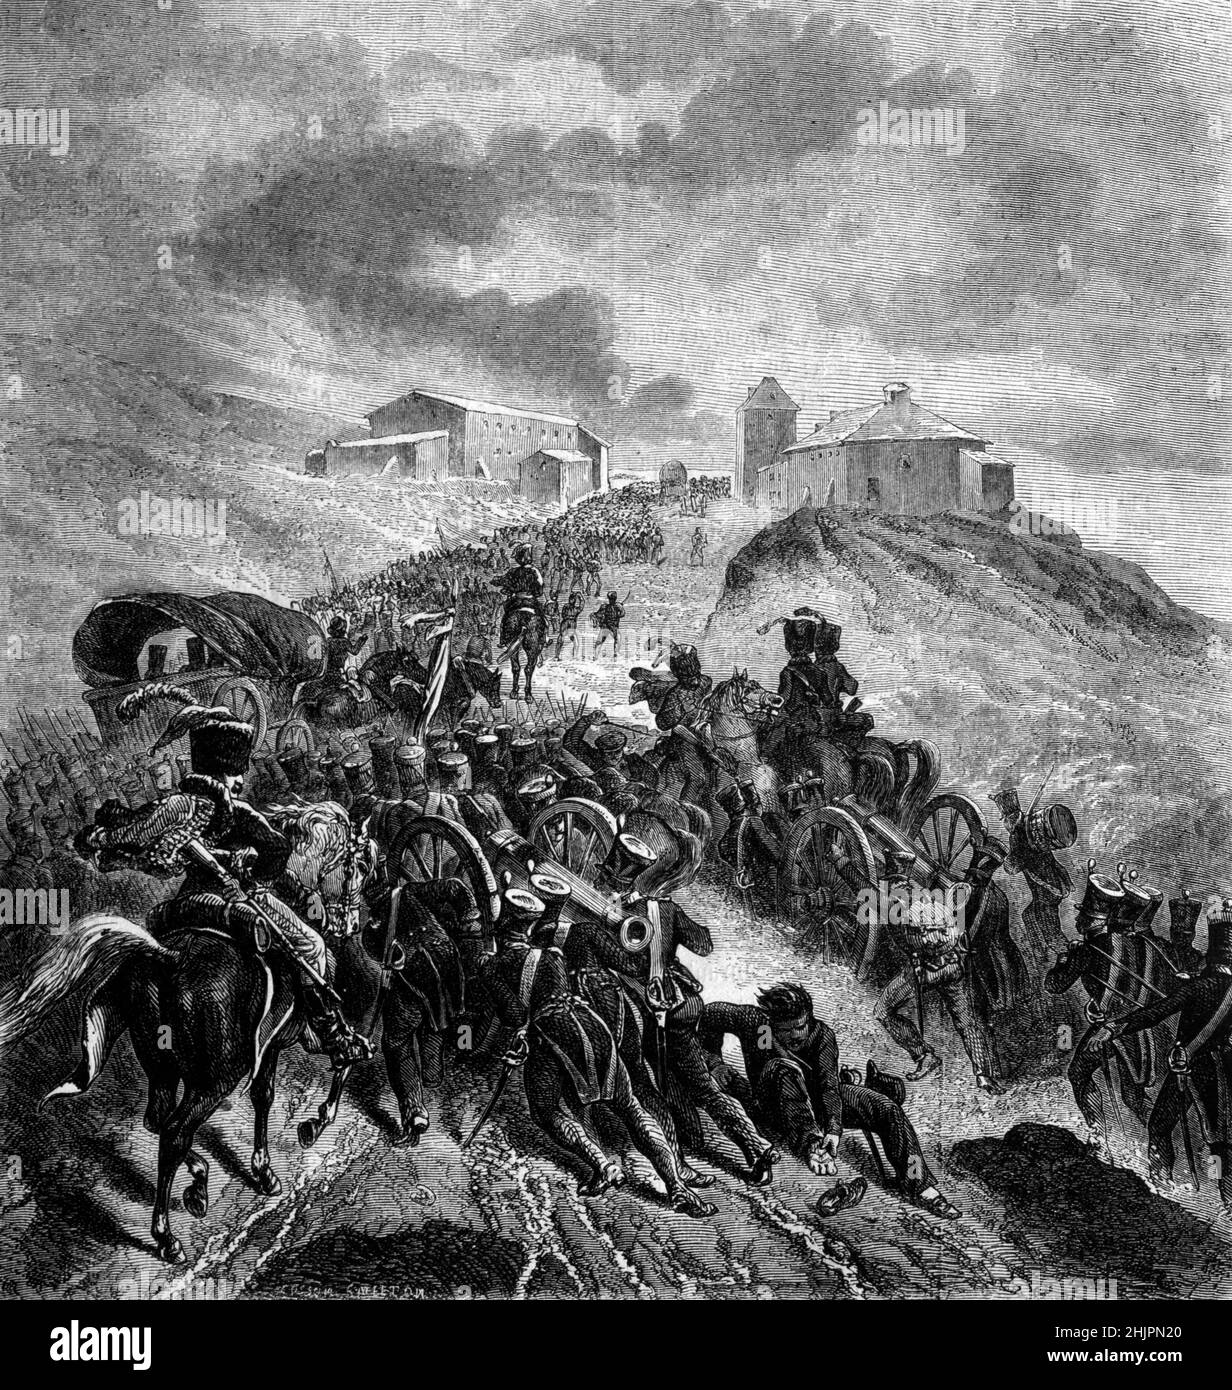 French Imperial Army, or French Army Under Napoleon, at Guadarrama Pass (1808), during the Spanish War of 1808-1809, Guadarrama Spain. The French were in pursuit of British forces under the command of Lietenant-General Sir John Moore. Vintage Illustration or Engraving 1865 Stock Photo